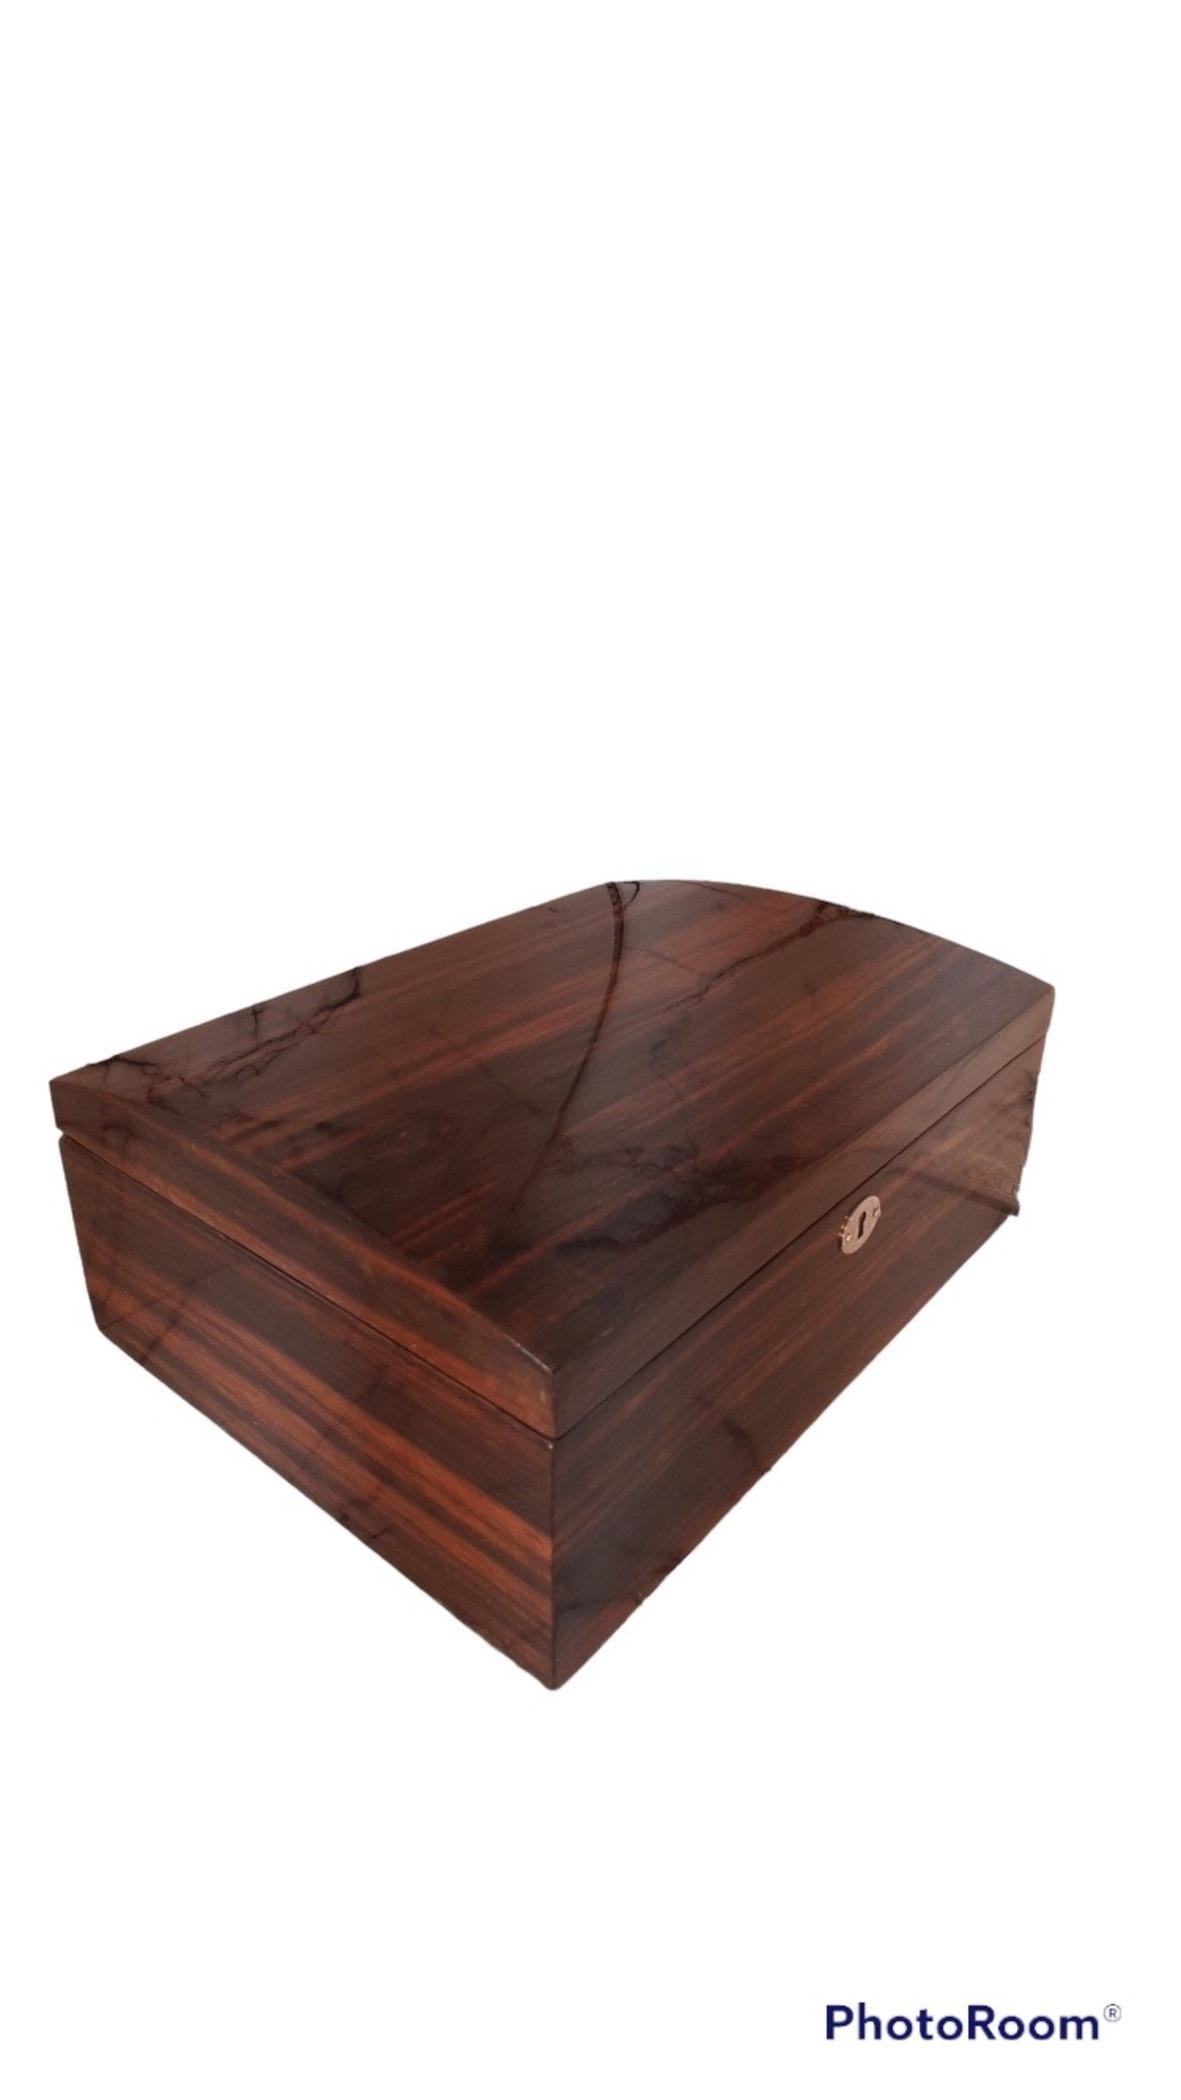 This watch box is made of exotic ebony veneer and nubuck fabric inside.
Large watch box at 6 o'clock. Its solid wood watch case.
This would be the perfect gift for Valentine's Day. luxury watch organizer,

You can buy this clock storage for